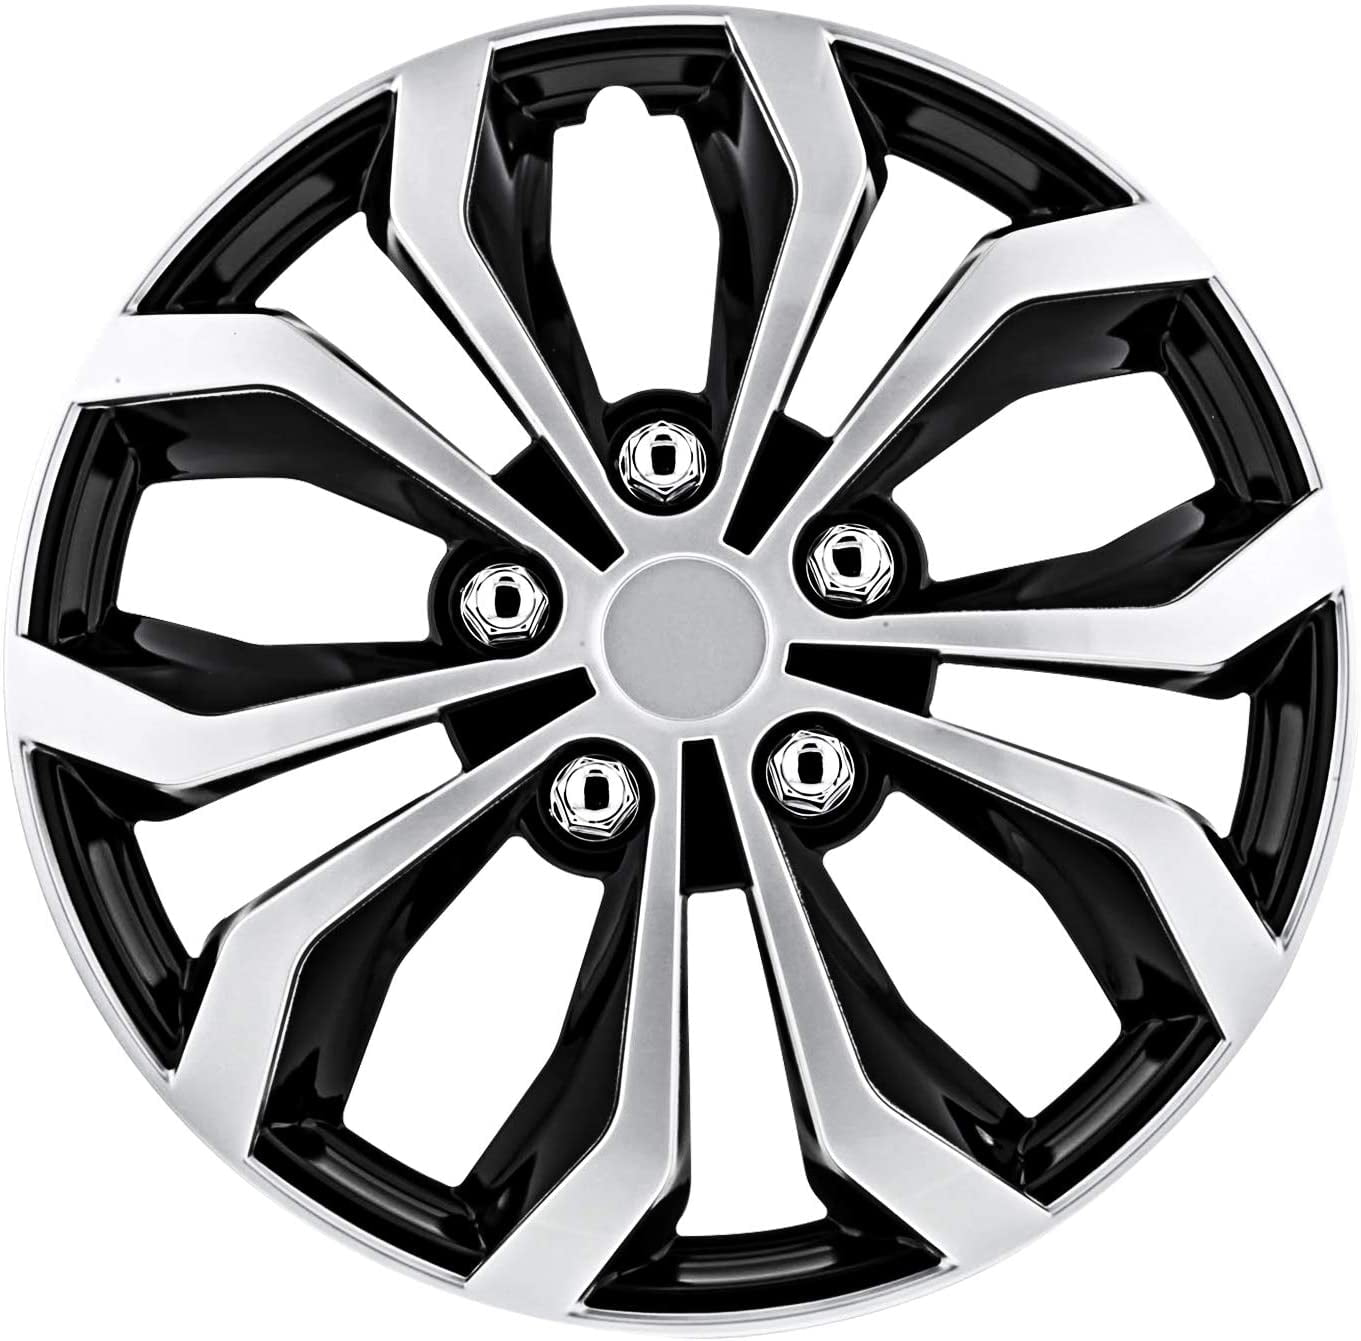 Pilot Automotive 18 In. Spyder Performance Wheel Covers Hubcaps Set of 